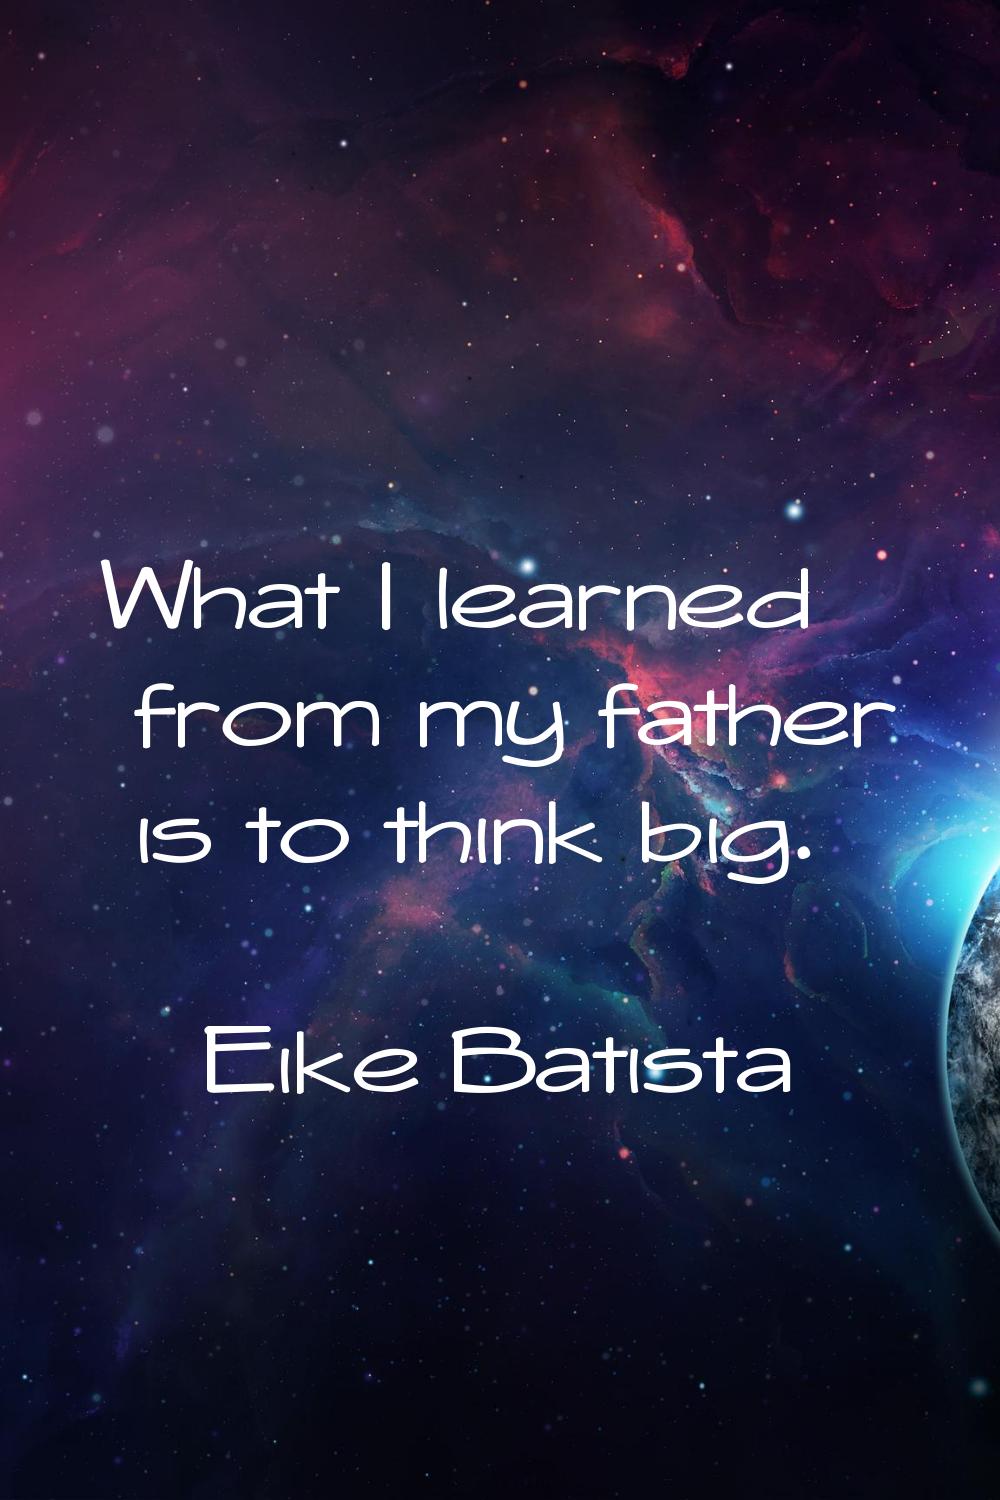 What I learned from my father is to think big.